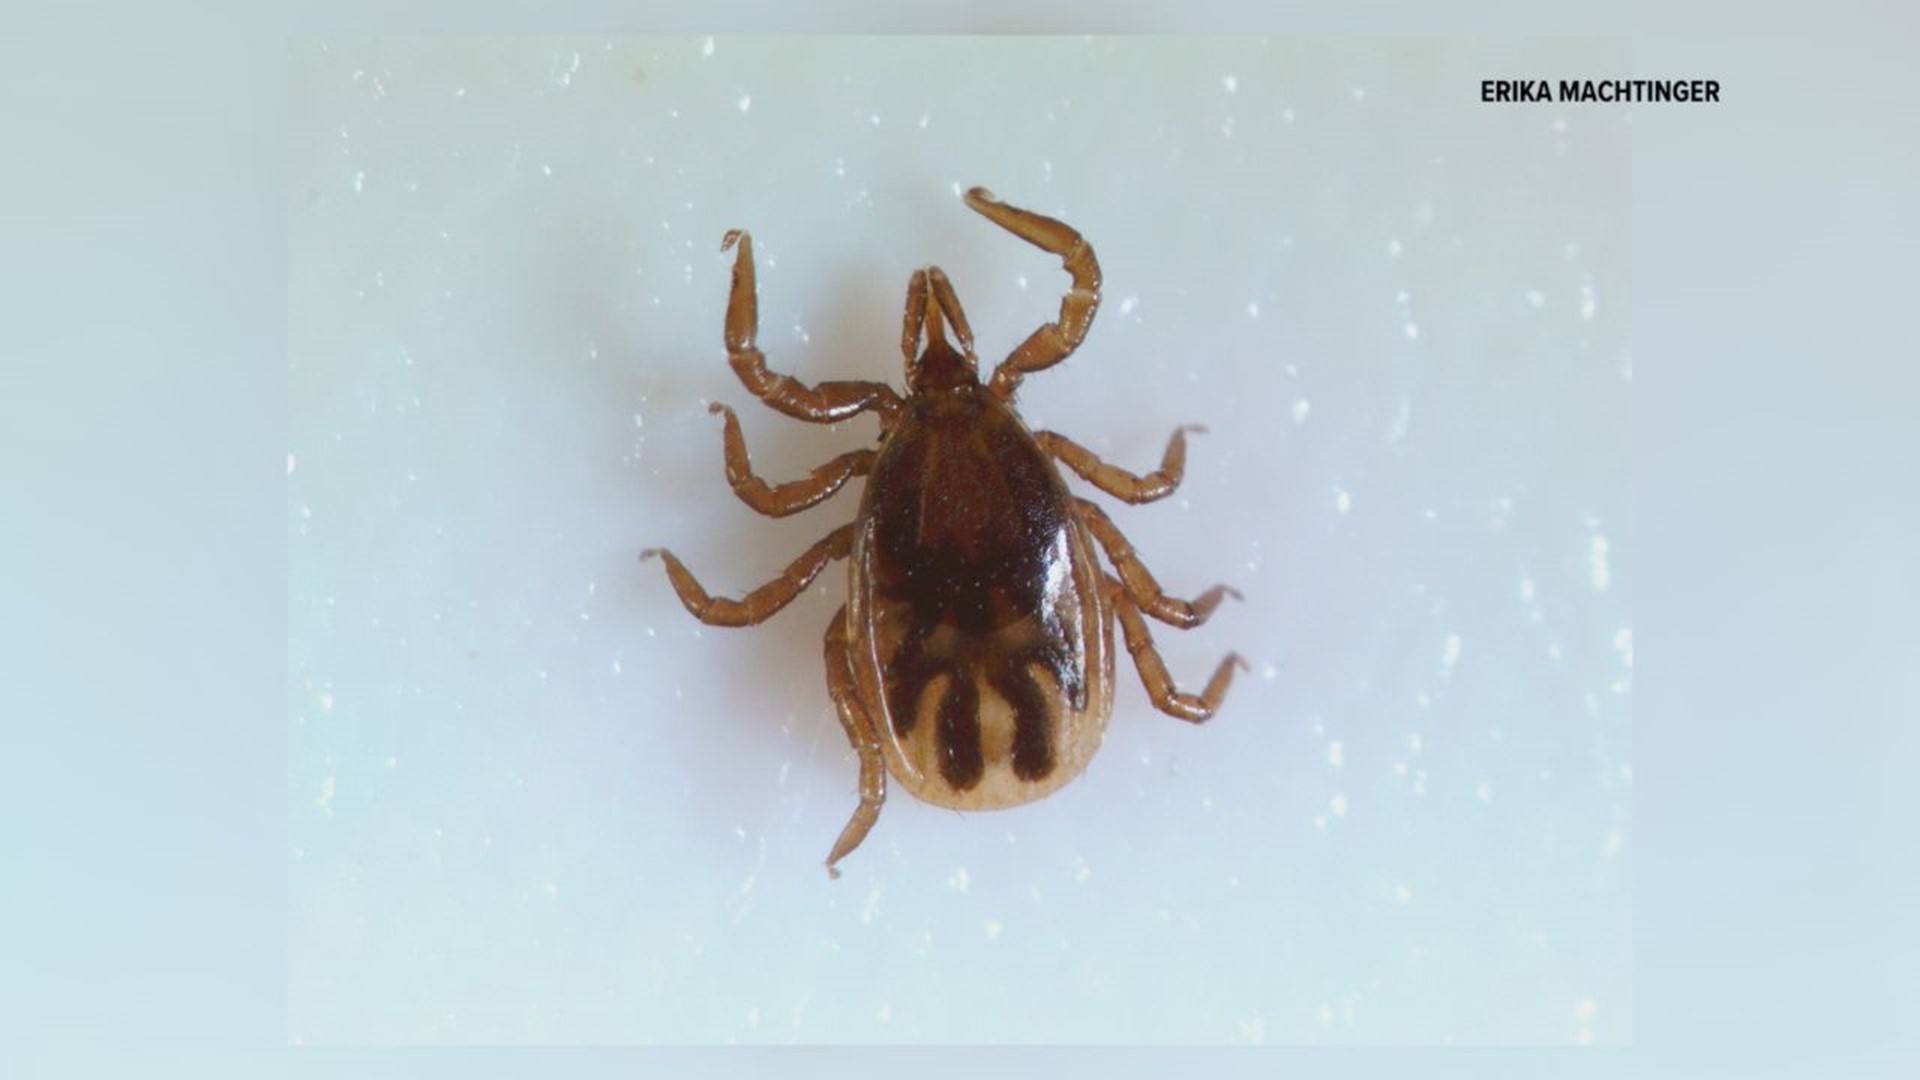 It only takes temperatures above 40 degrees for deer ticks to become active. After a record warm winter, experts say people should be cautious of the pests.